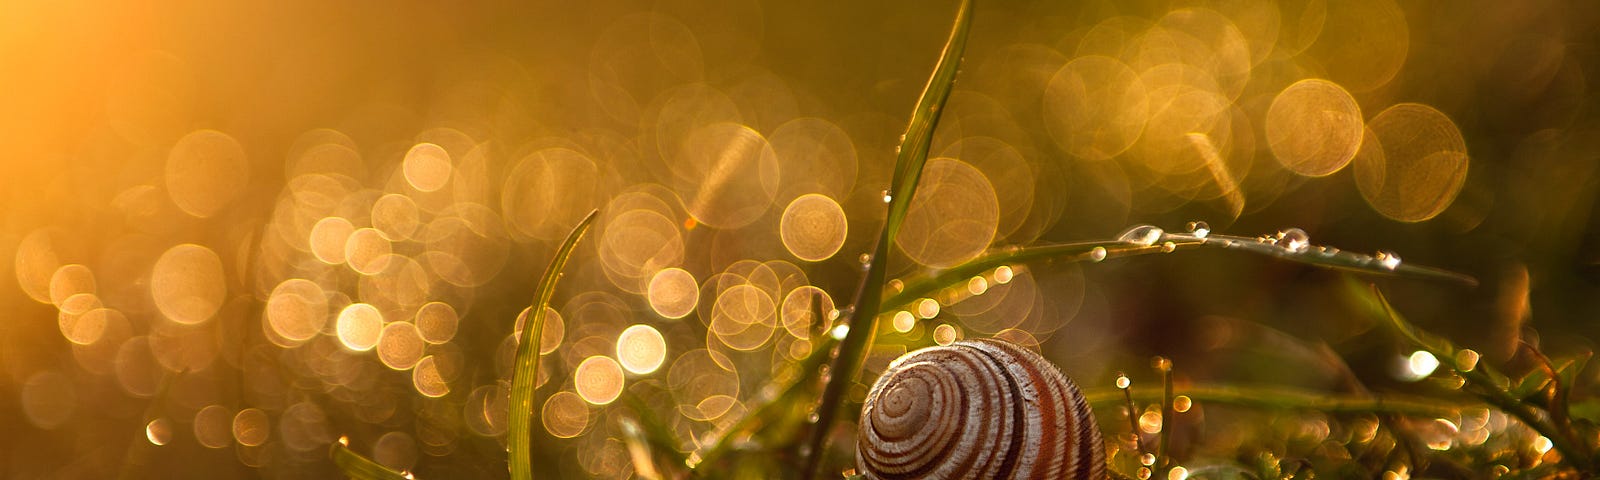 Snail on grass with fantasy-style backlighting